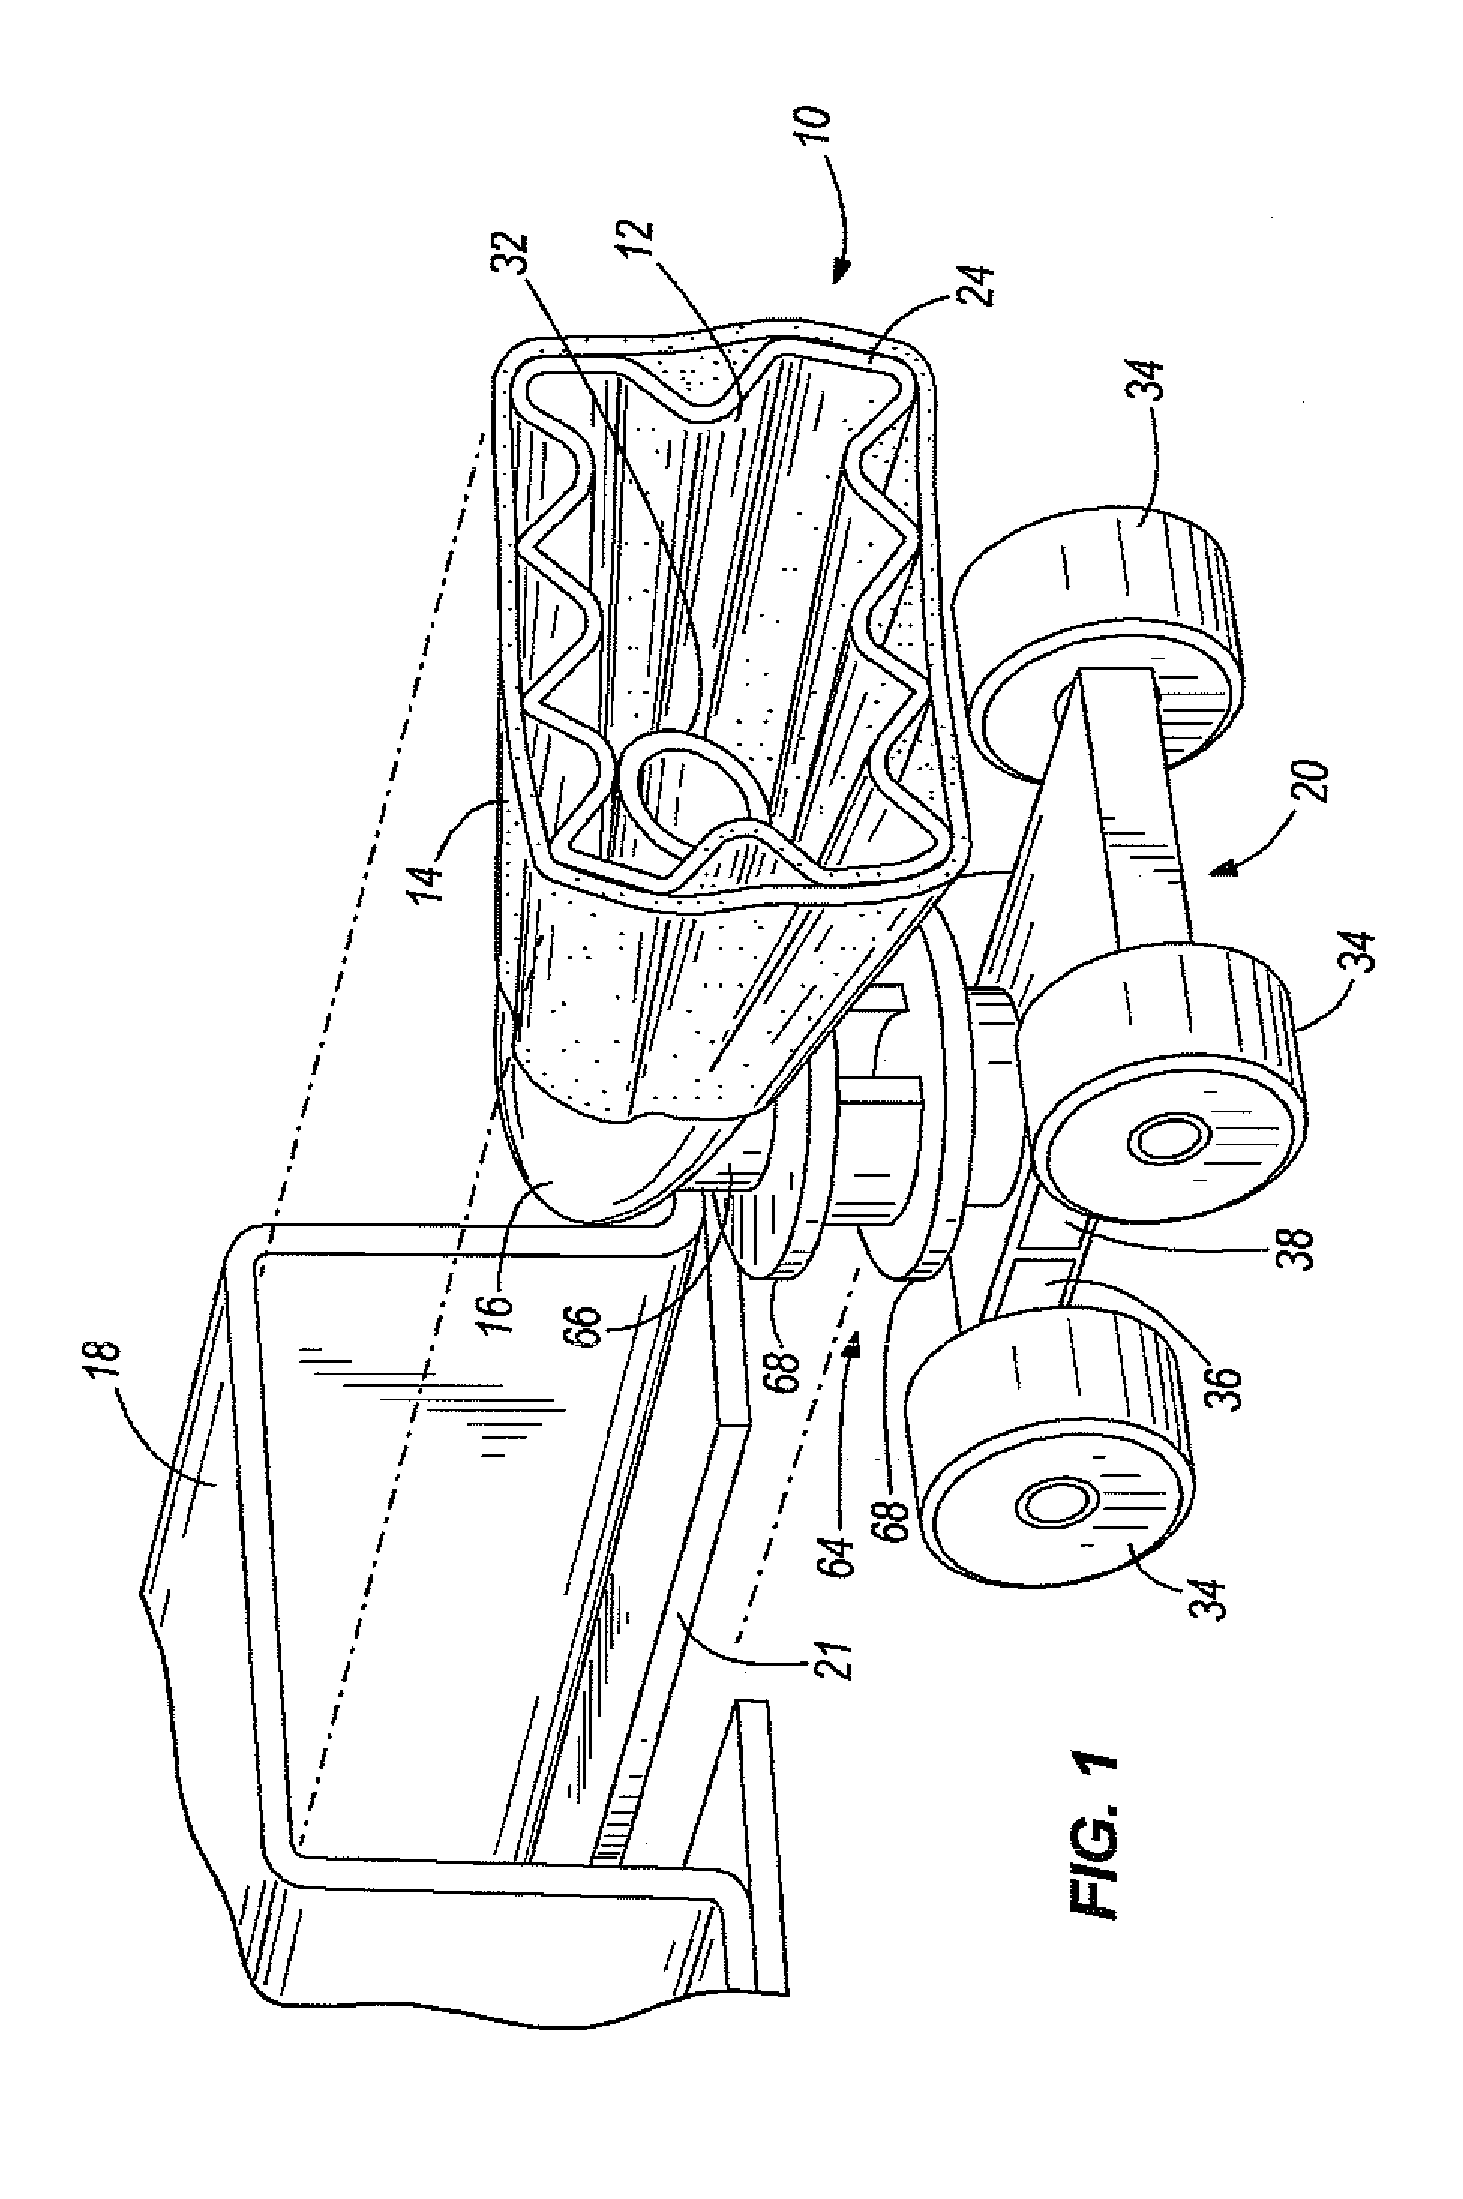 Cleaning bullet and method of operating the same